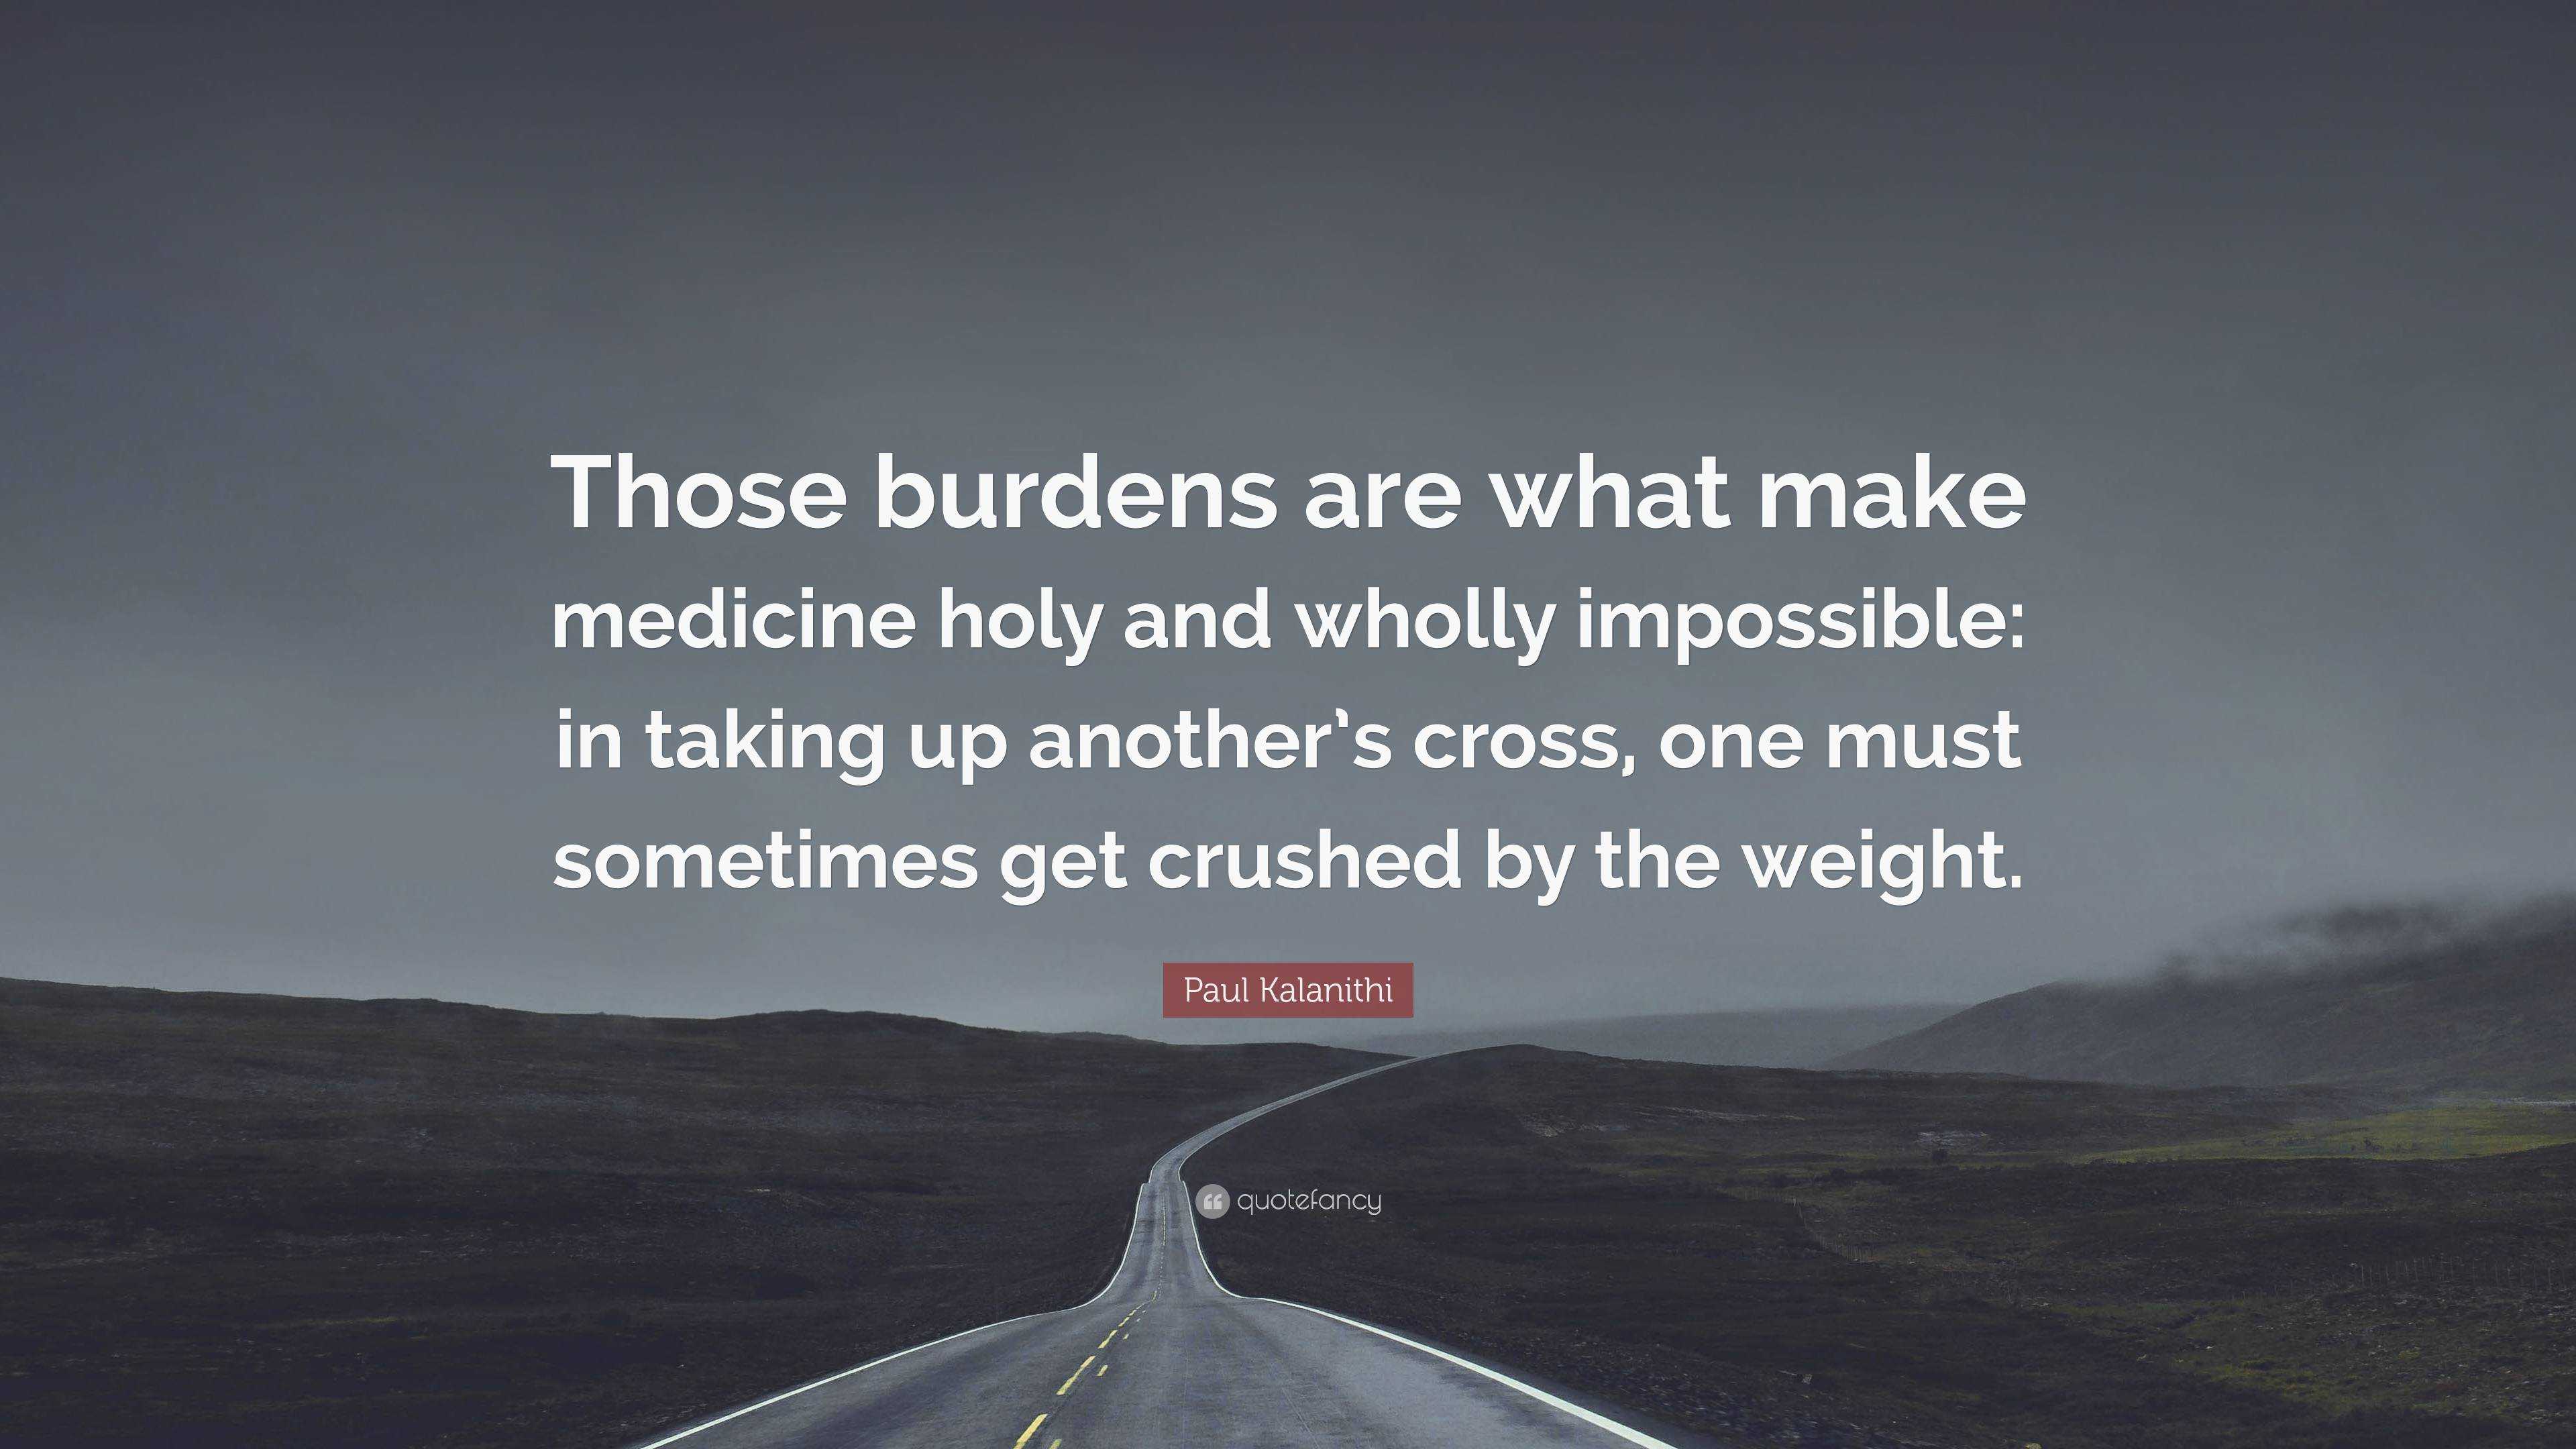 Paul Kalanithi Quote: “Those burdens are what make medicine holy and